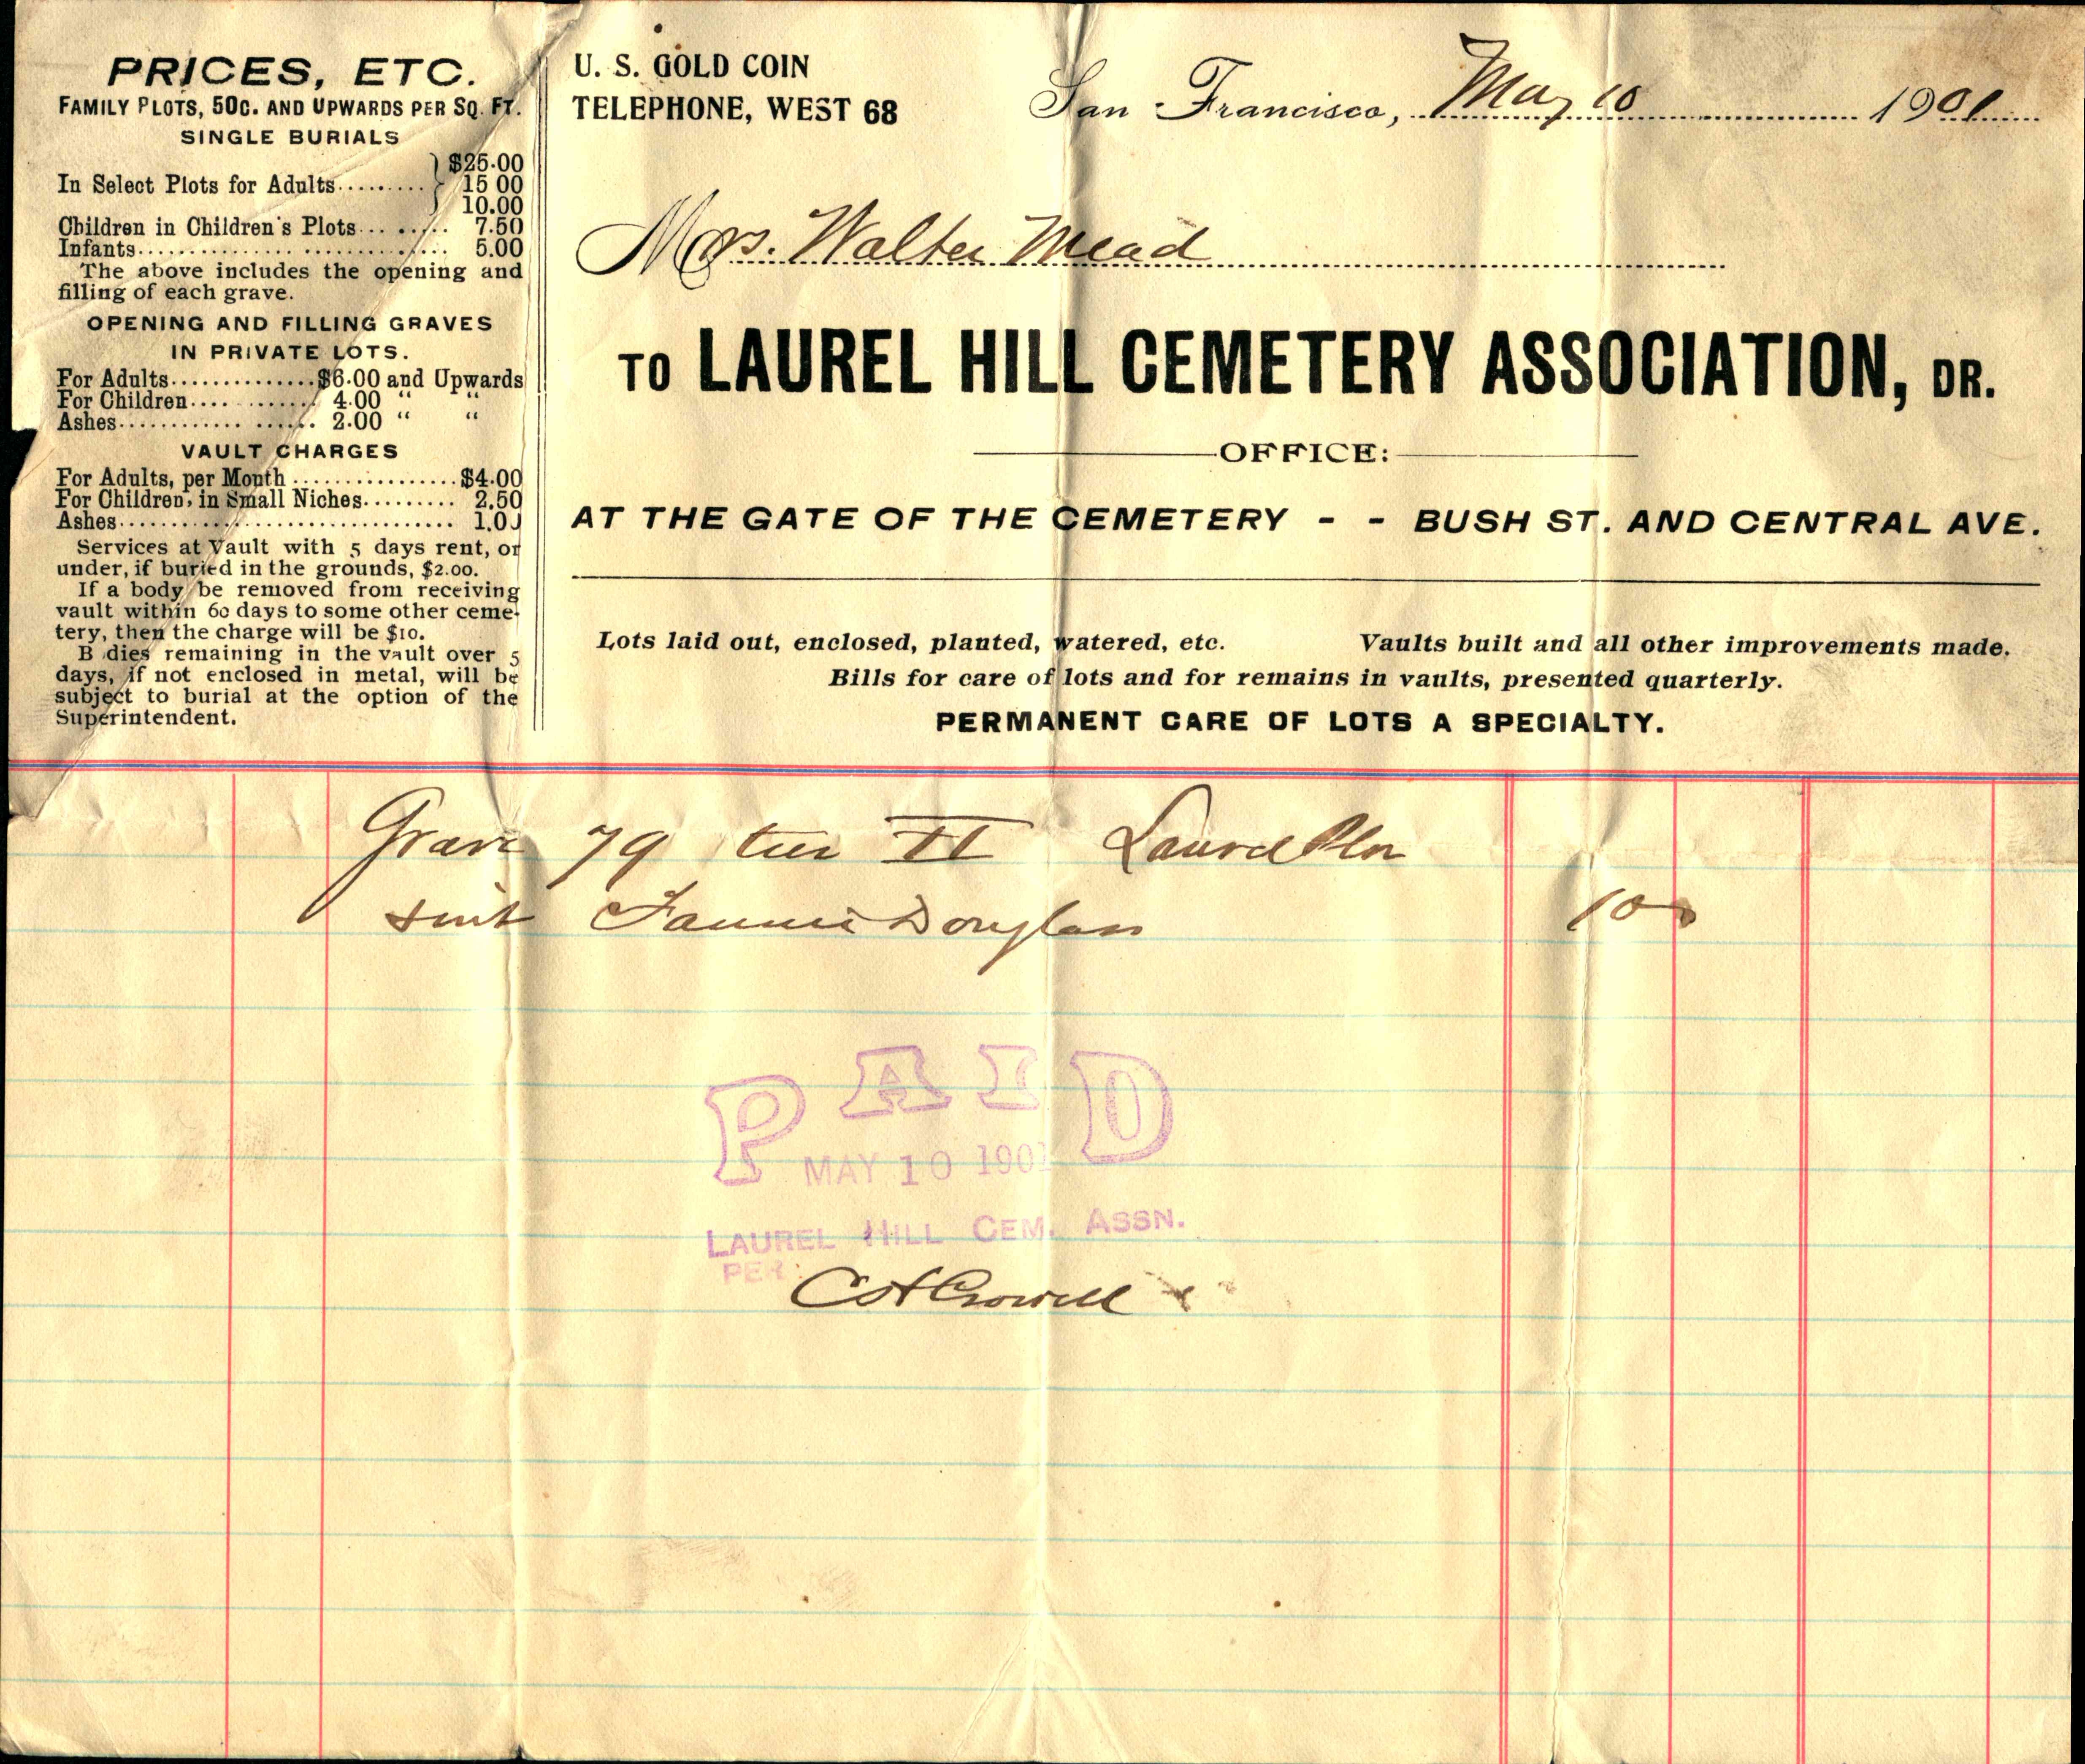 Receipt for cemetery services